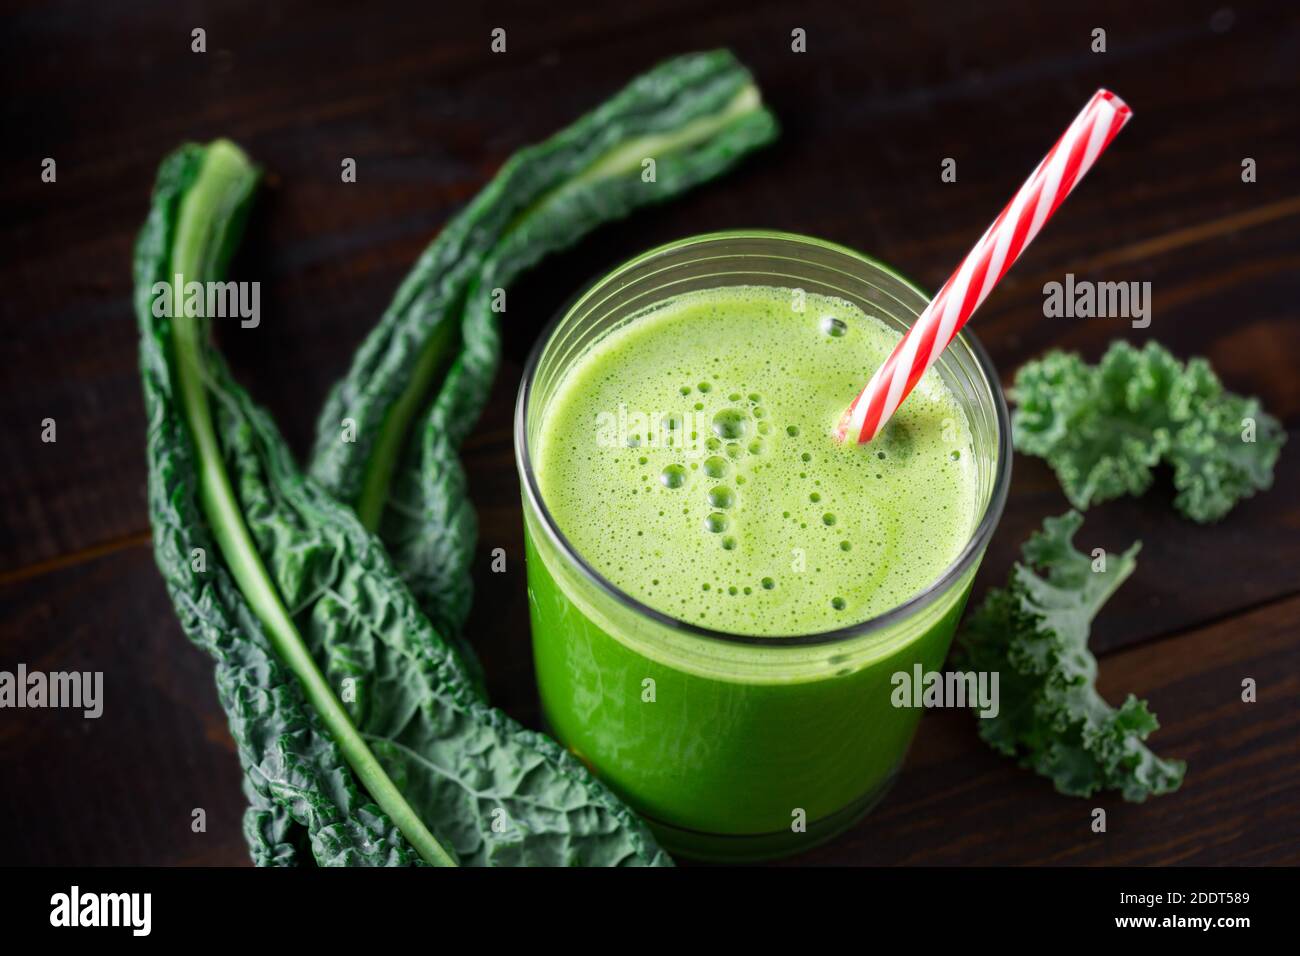 Glass of fresh green juice made with kale on a dark wooden surface Stock Photo